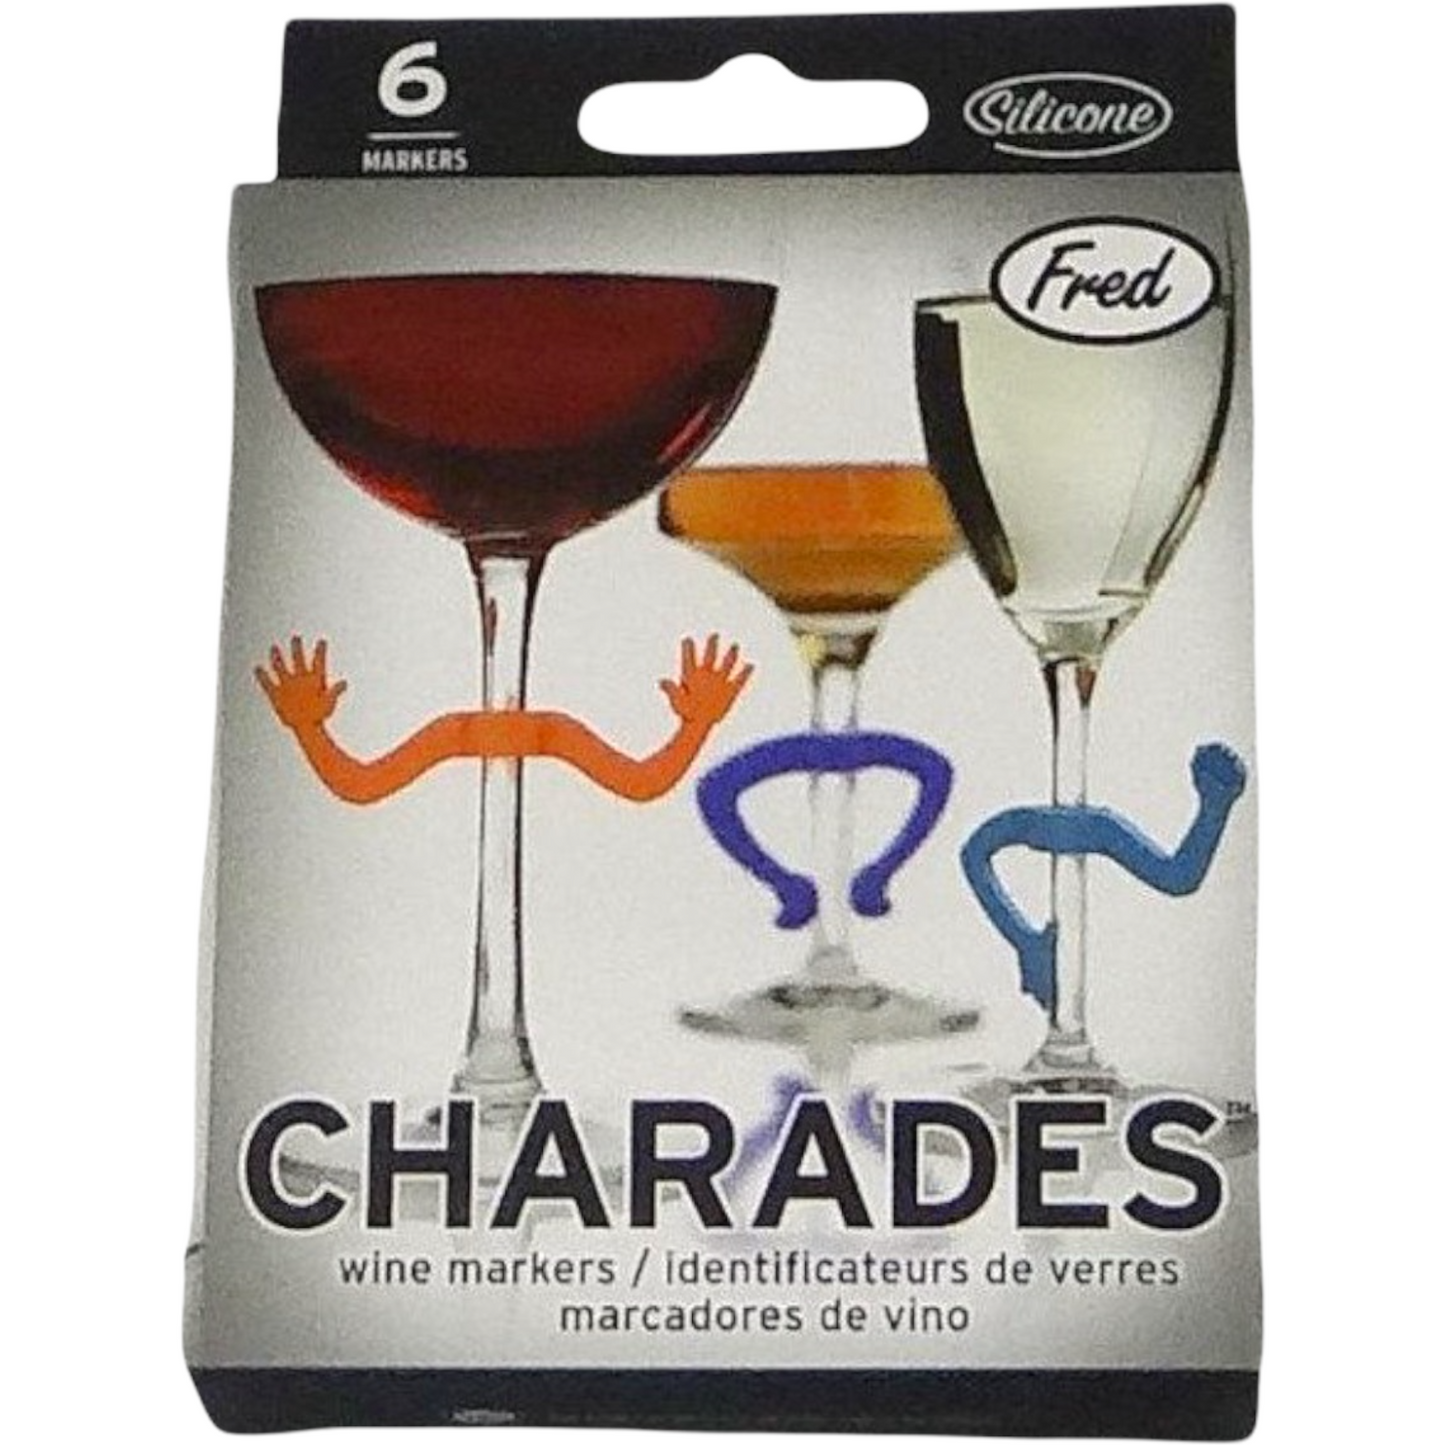 FRED CHARADES WINE MARKERS